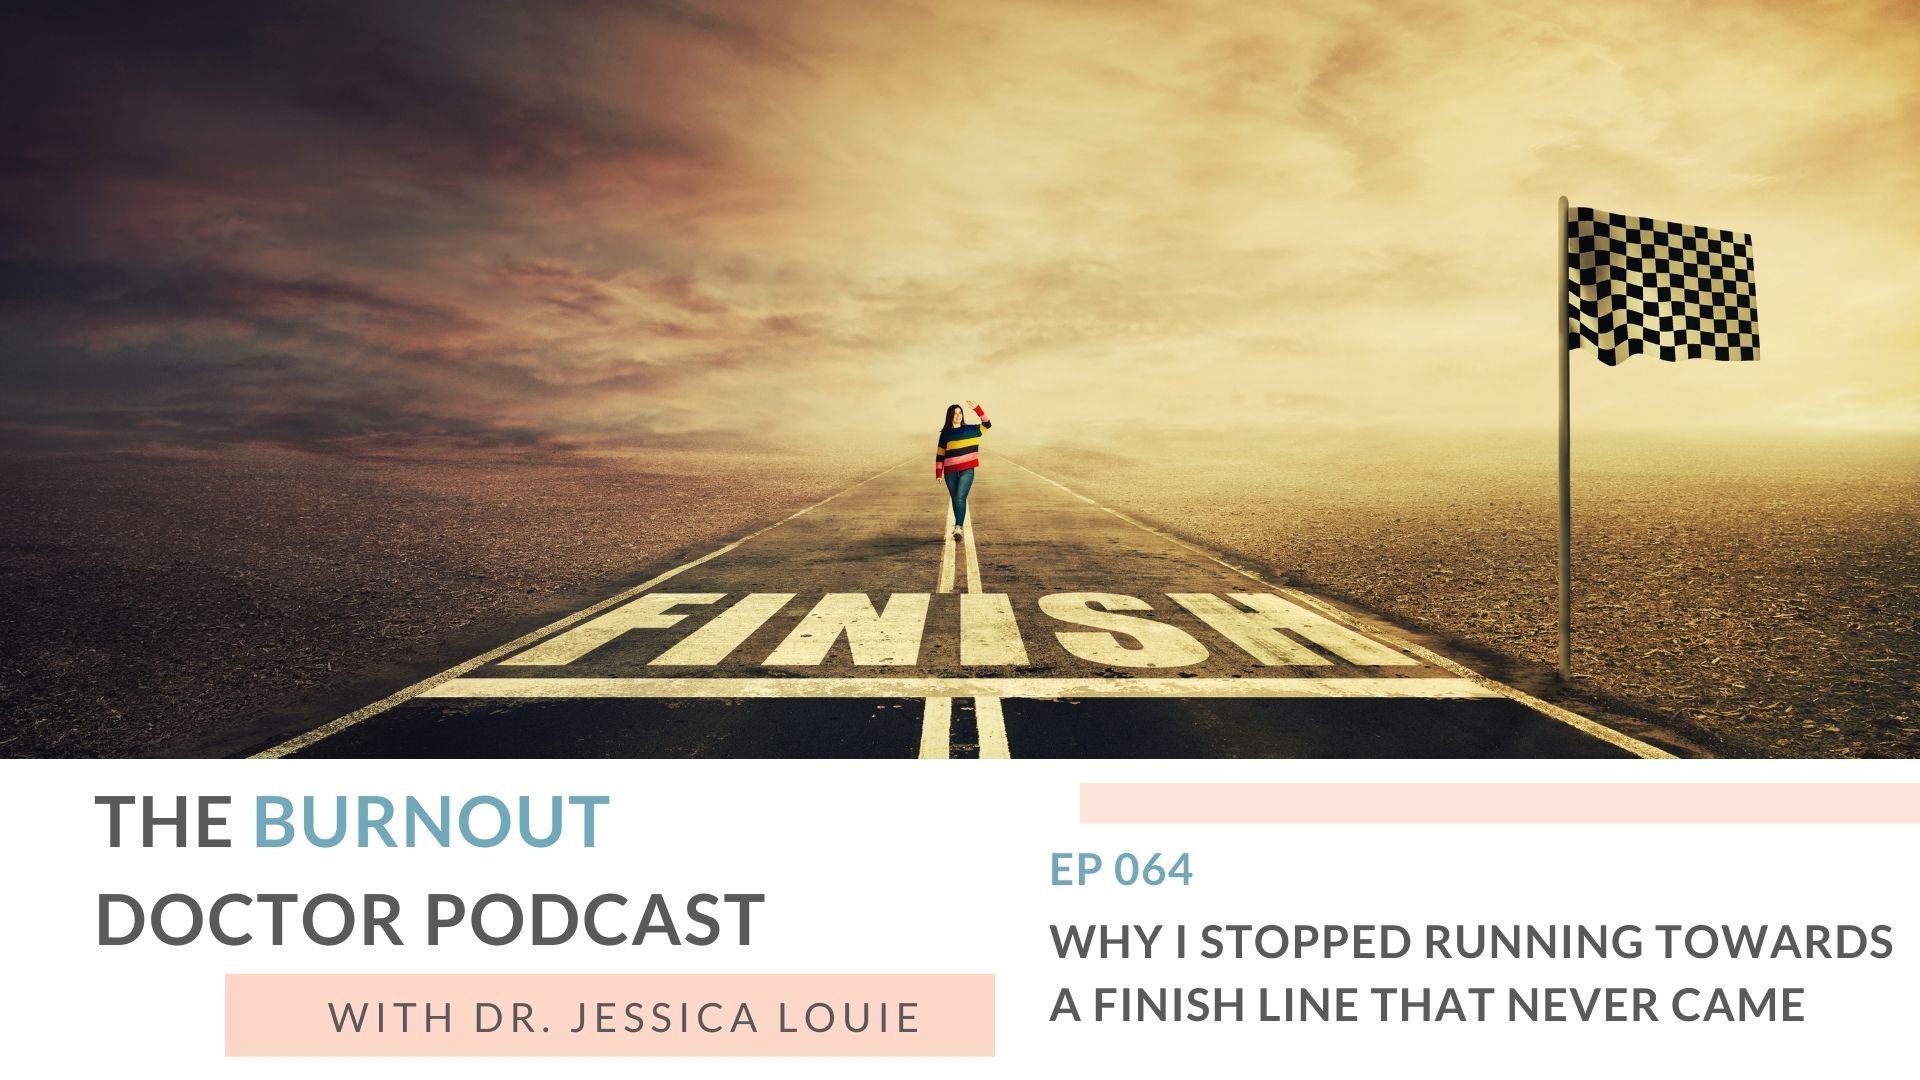 Why I stopped running towards a finish line that never came, healthcare training burnout, pharmacist burnout, graduate school stress, The Burnout Doctor Podcast by Dr. Jessica Louie and Clarify Simplify Align Method.